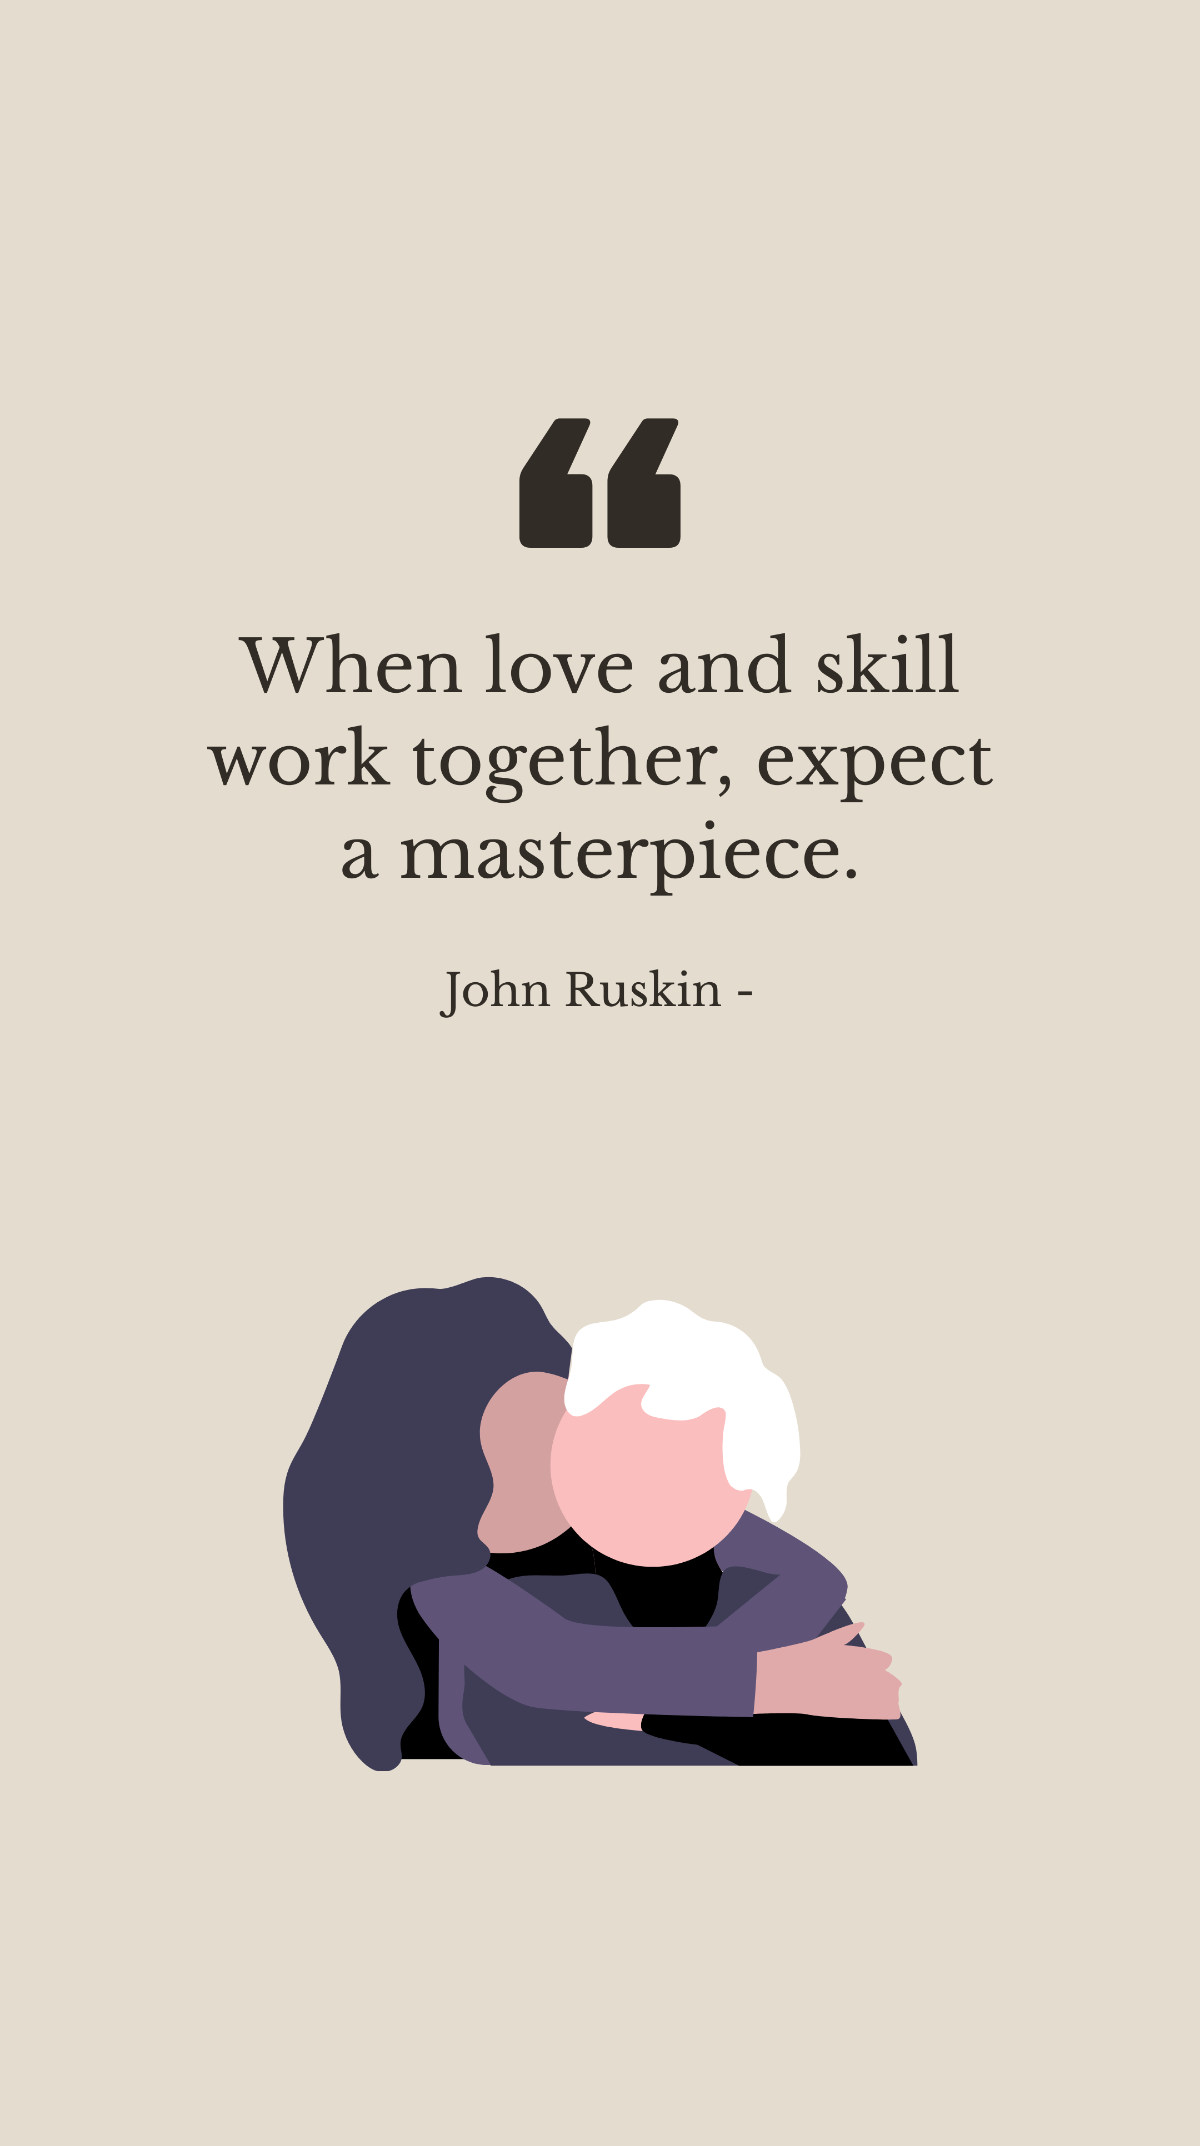 John Ruskin - When love and skill work together, expect a masterpiece.